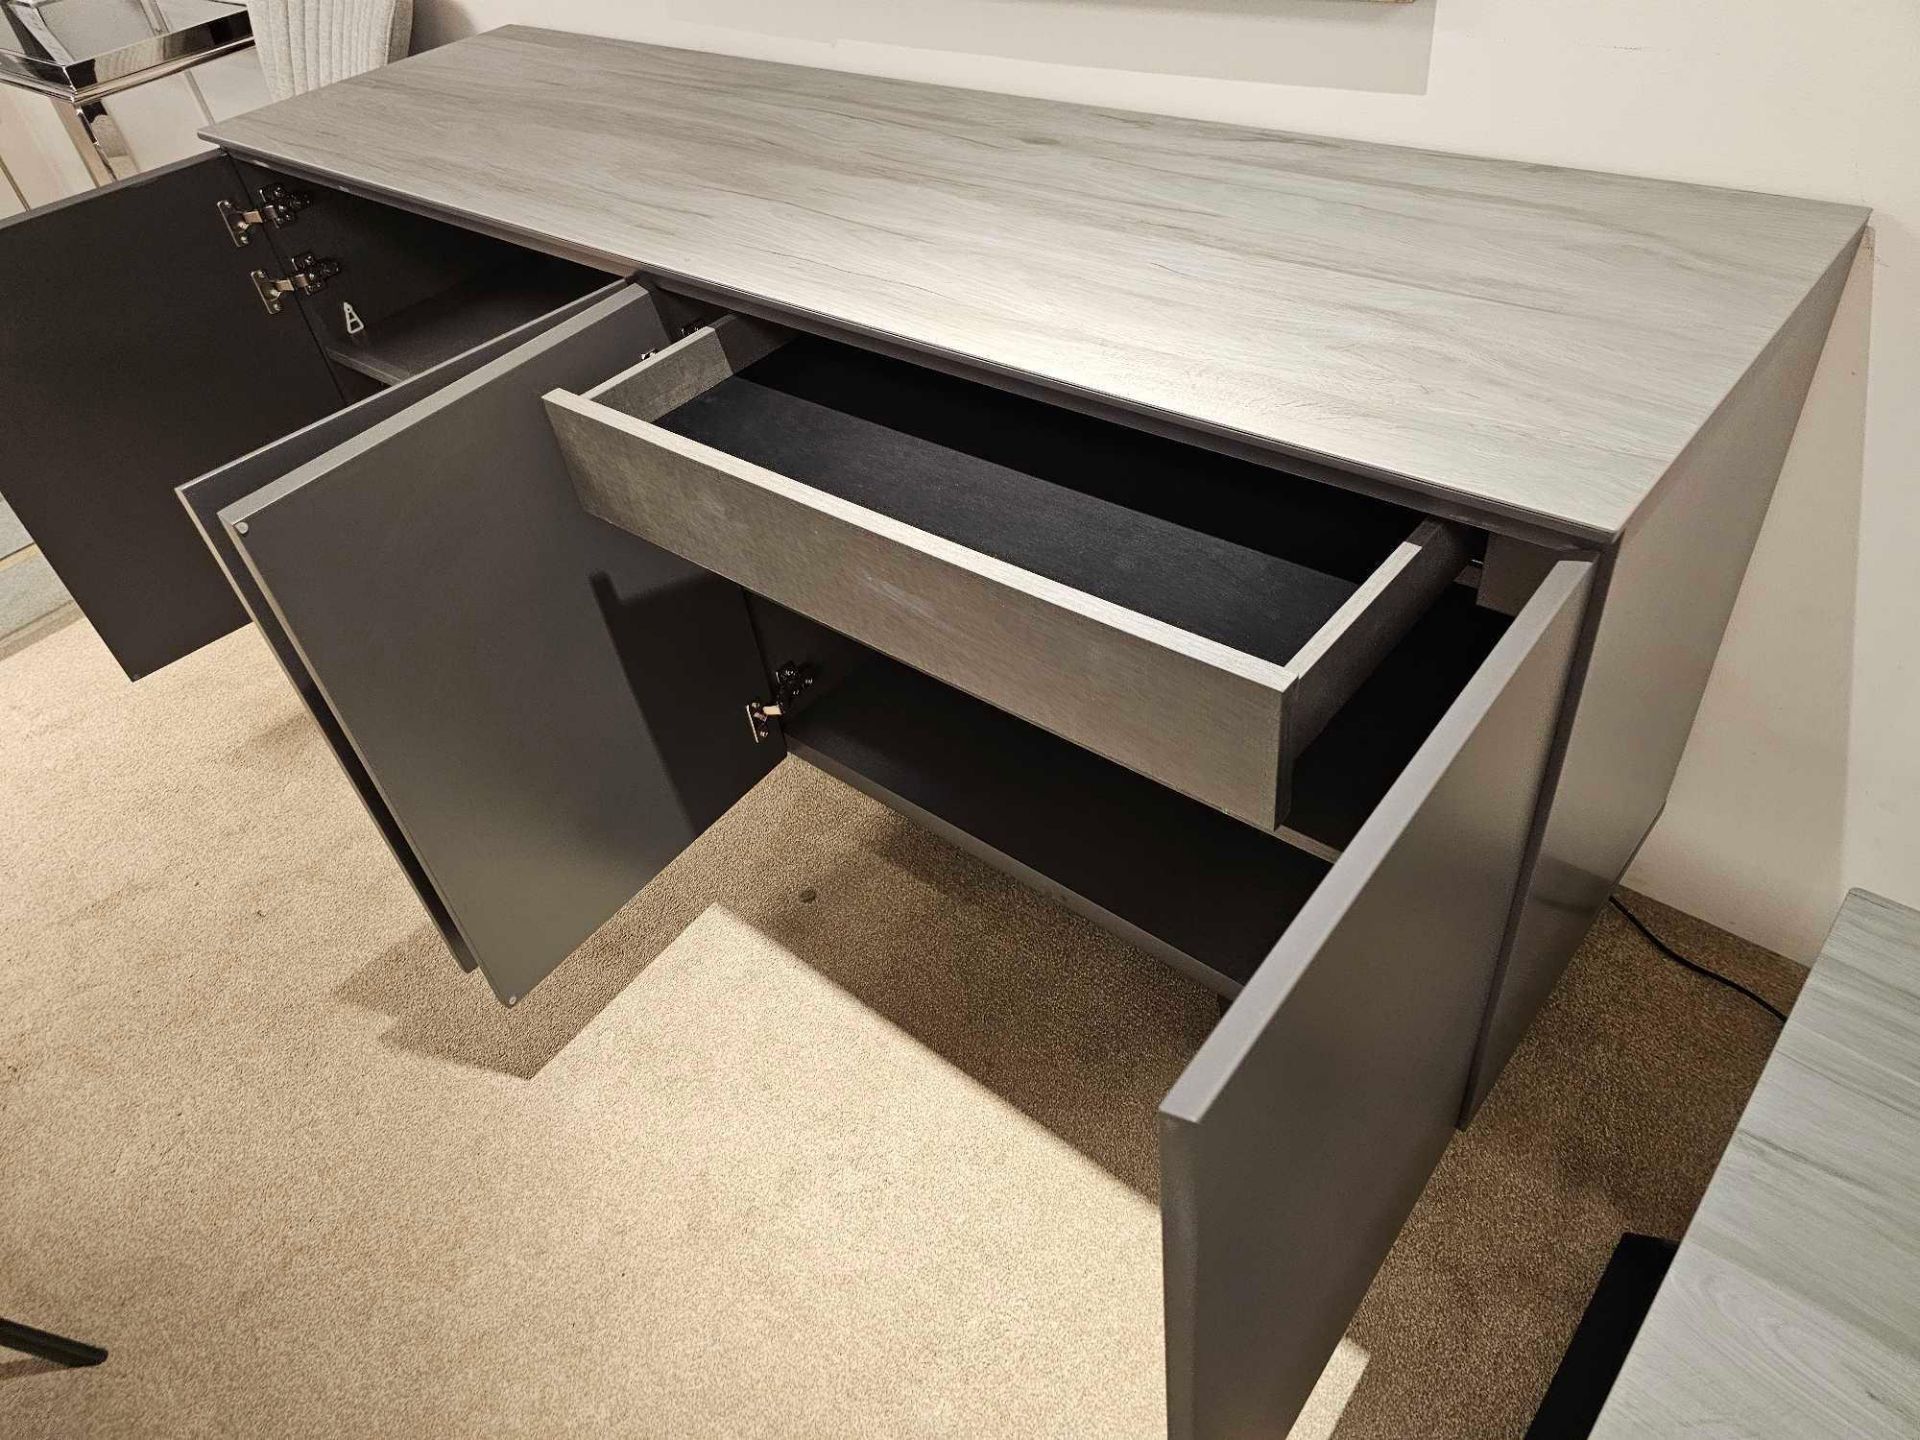 Spartan Sideboard by Kesterport The Spartan Four Door Sideboard provides is striking as a stand - Image 9 of 12